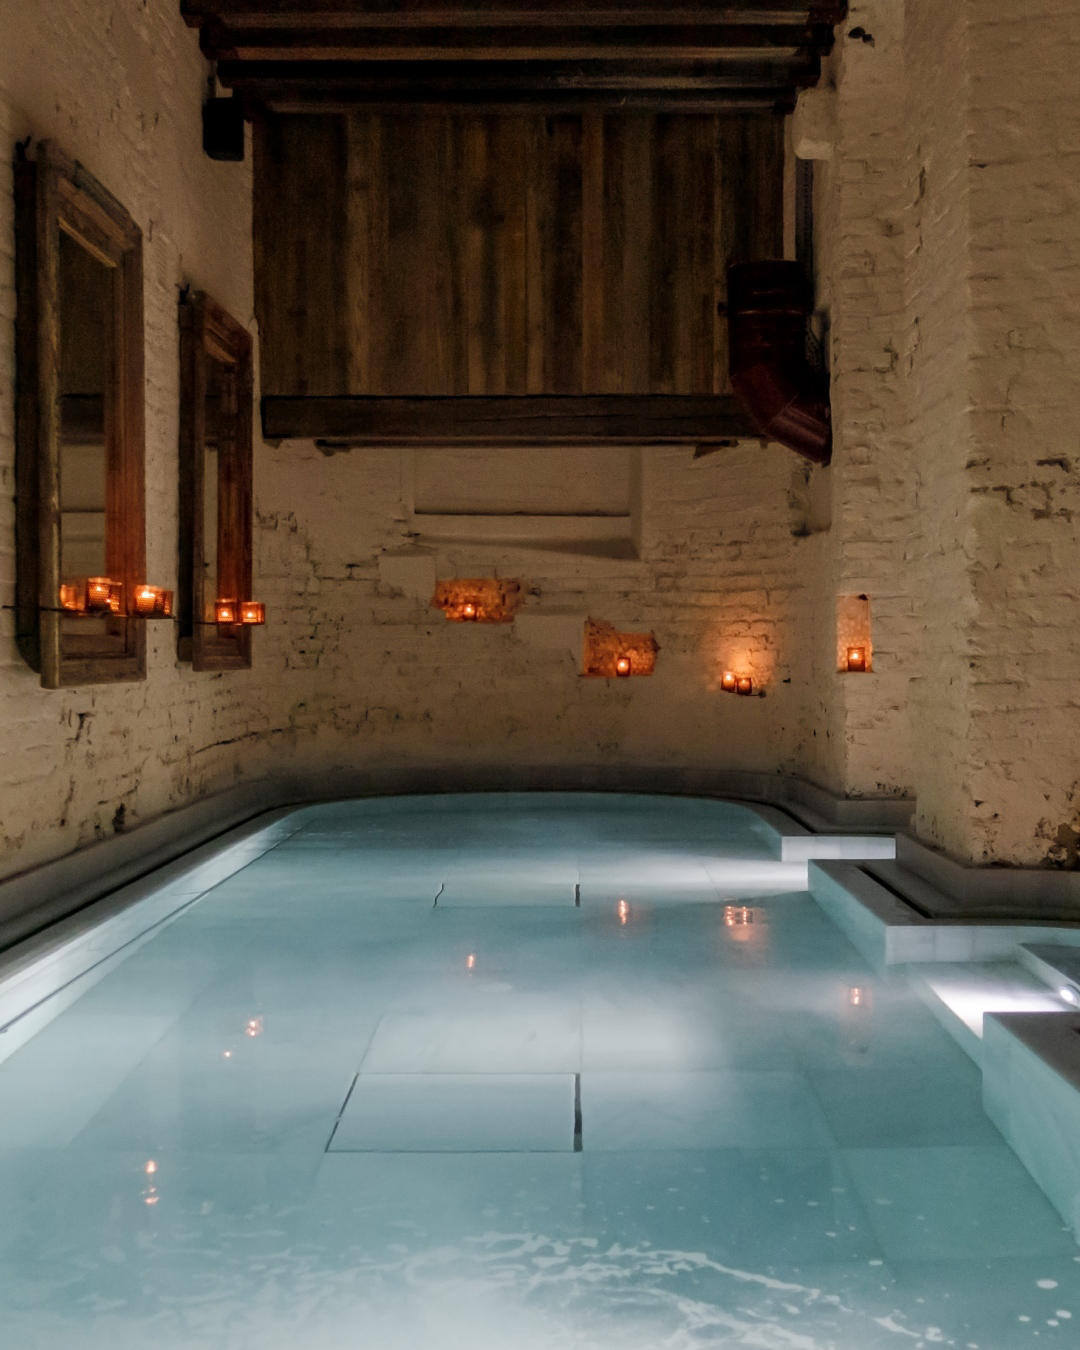 AIRE Ancient Baths UK - Have you been surprised with an AIRE Experience this Holiday Season